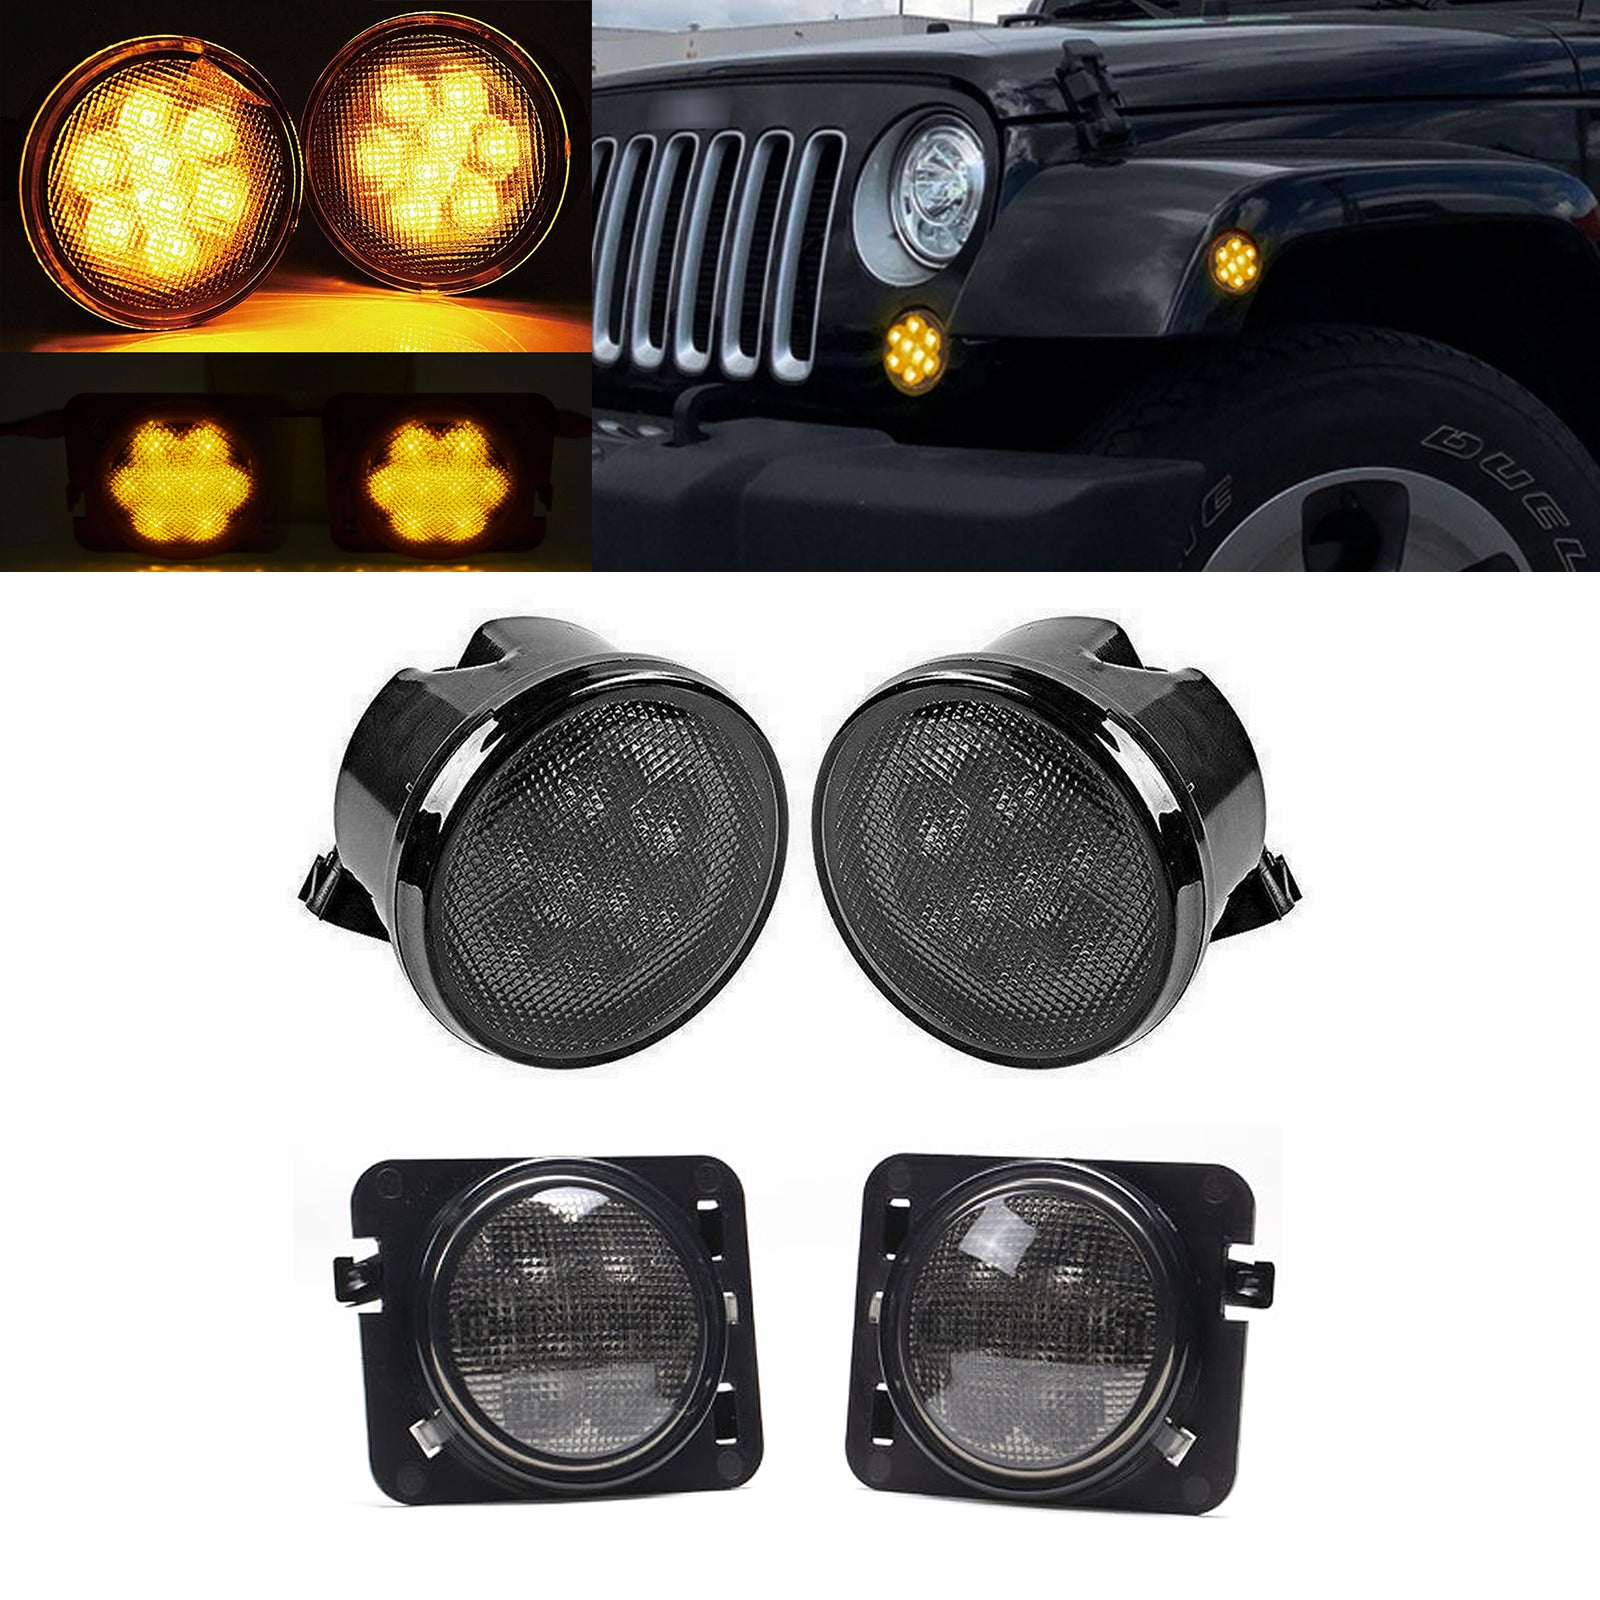 LED Turn Signal + Side Marker Fender Lights Smoked Lens For Jeep Wrang |  Xotic Tech